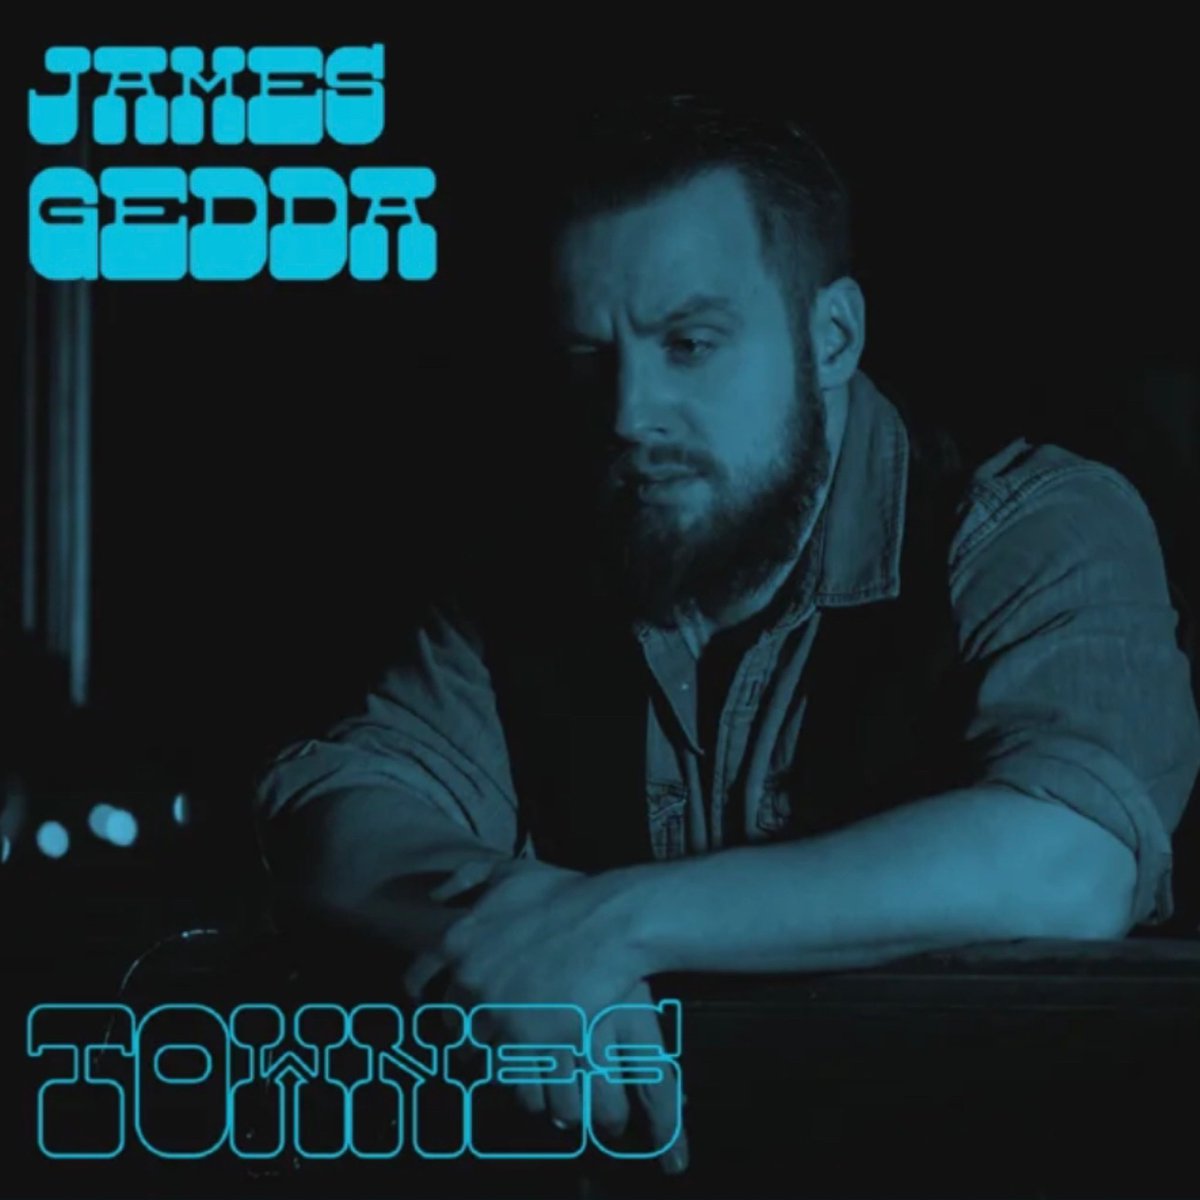 Are you listening to the new @JamesGedda tune? Every one else is, don’t get left behind.